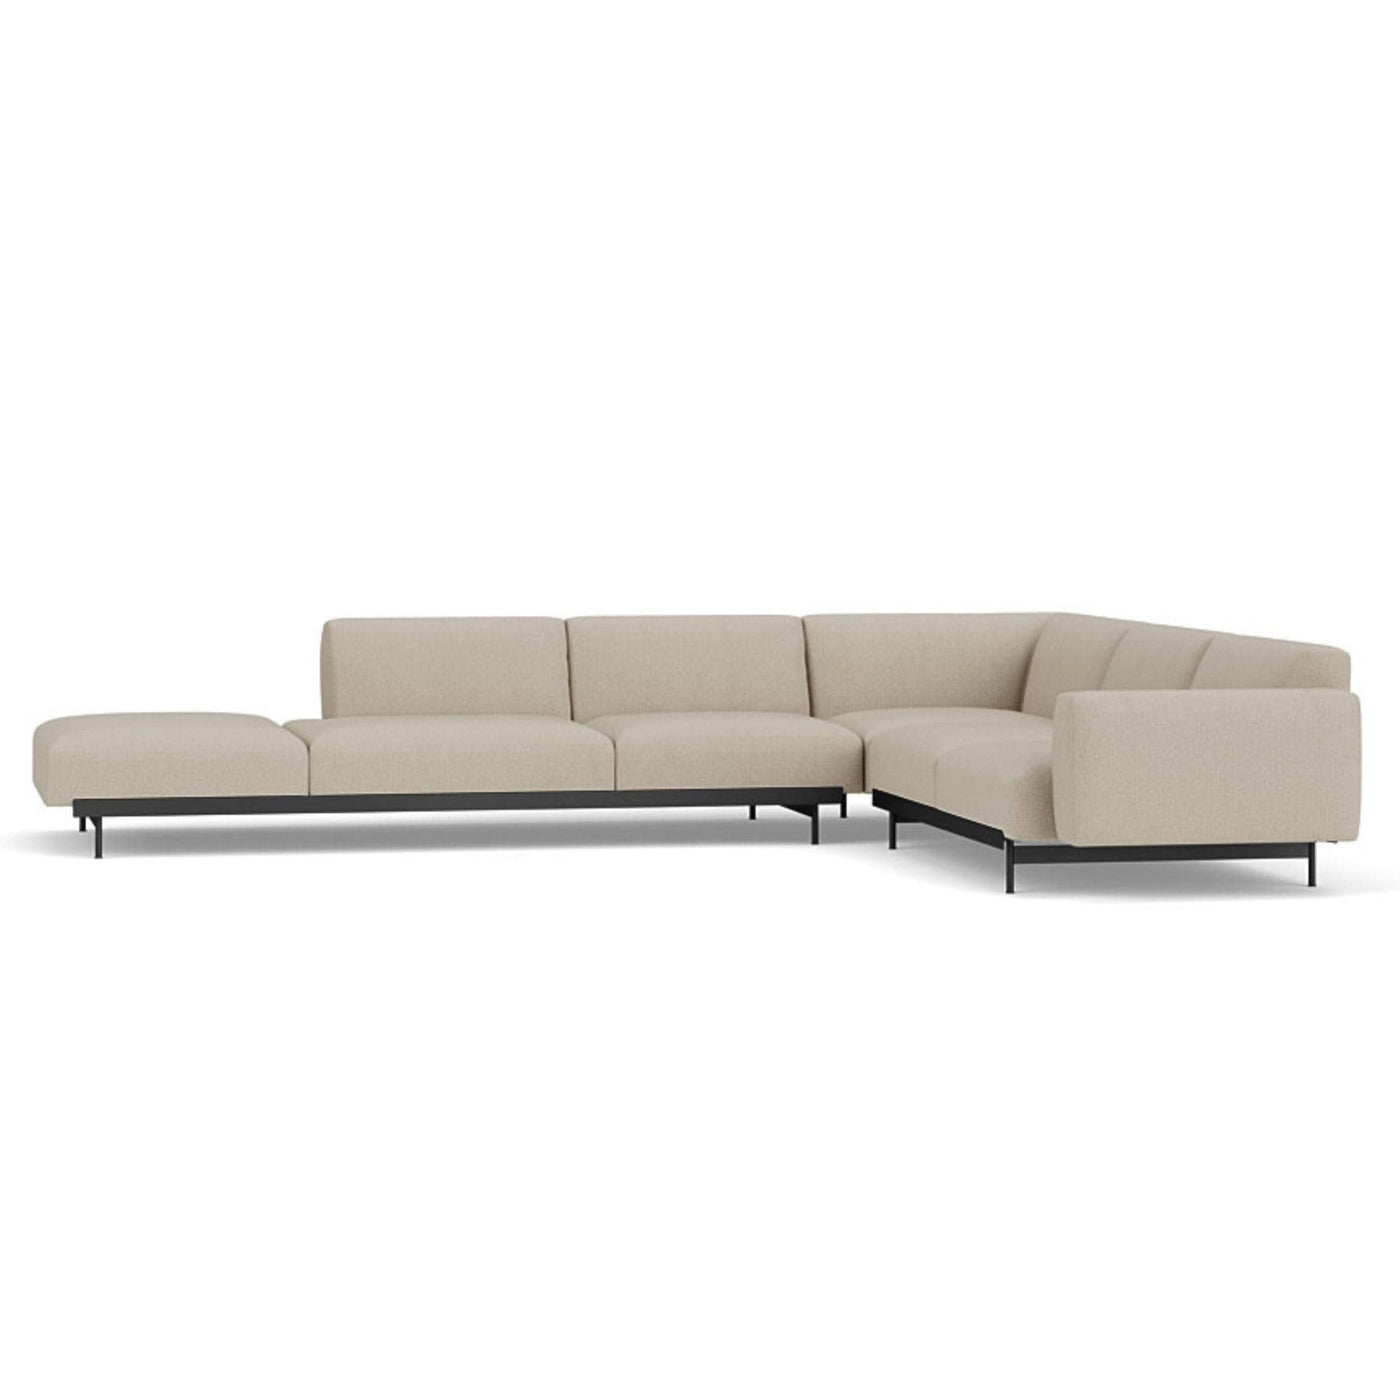 Muuto In Situ Modular Corner Sofa. Made to order  from someday designs. #colour_clay-10